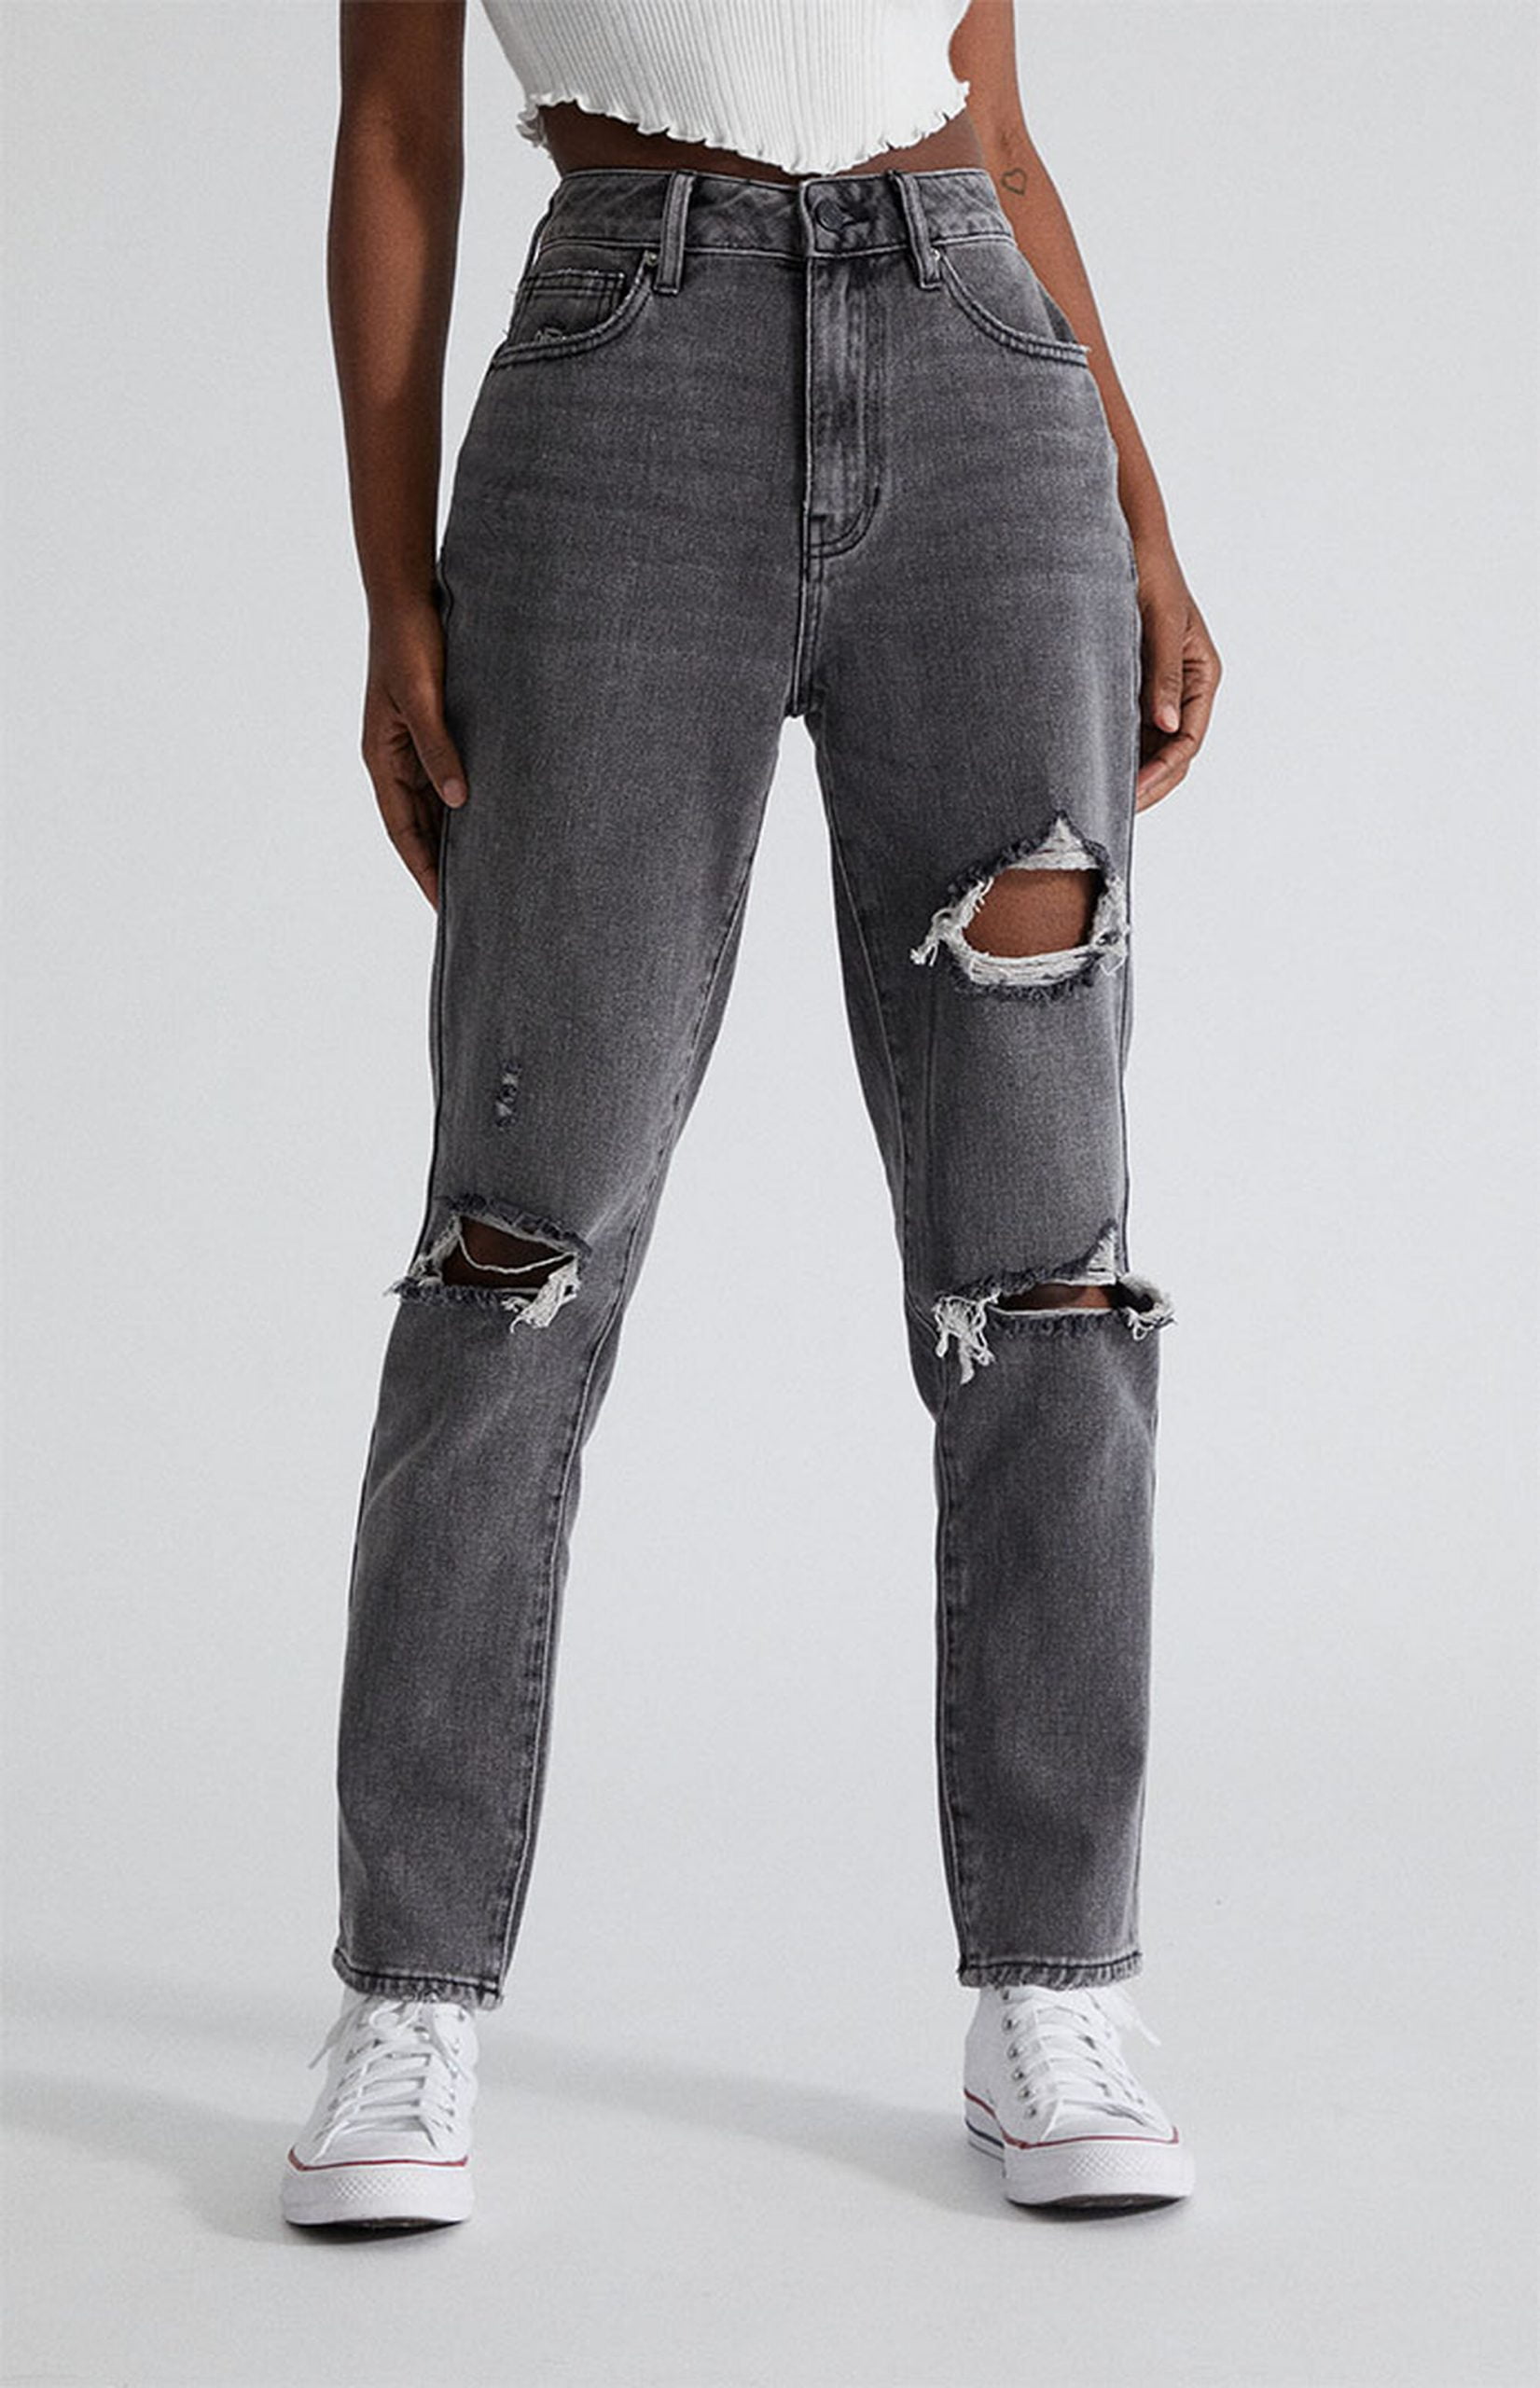 PacSun Faded Black Ripped Mom Jeans